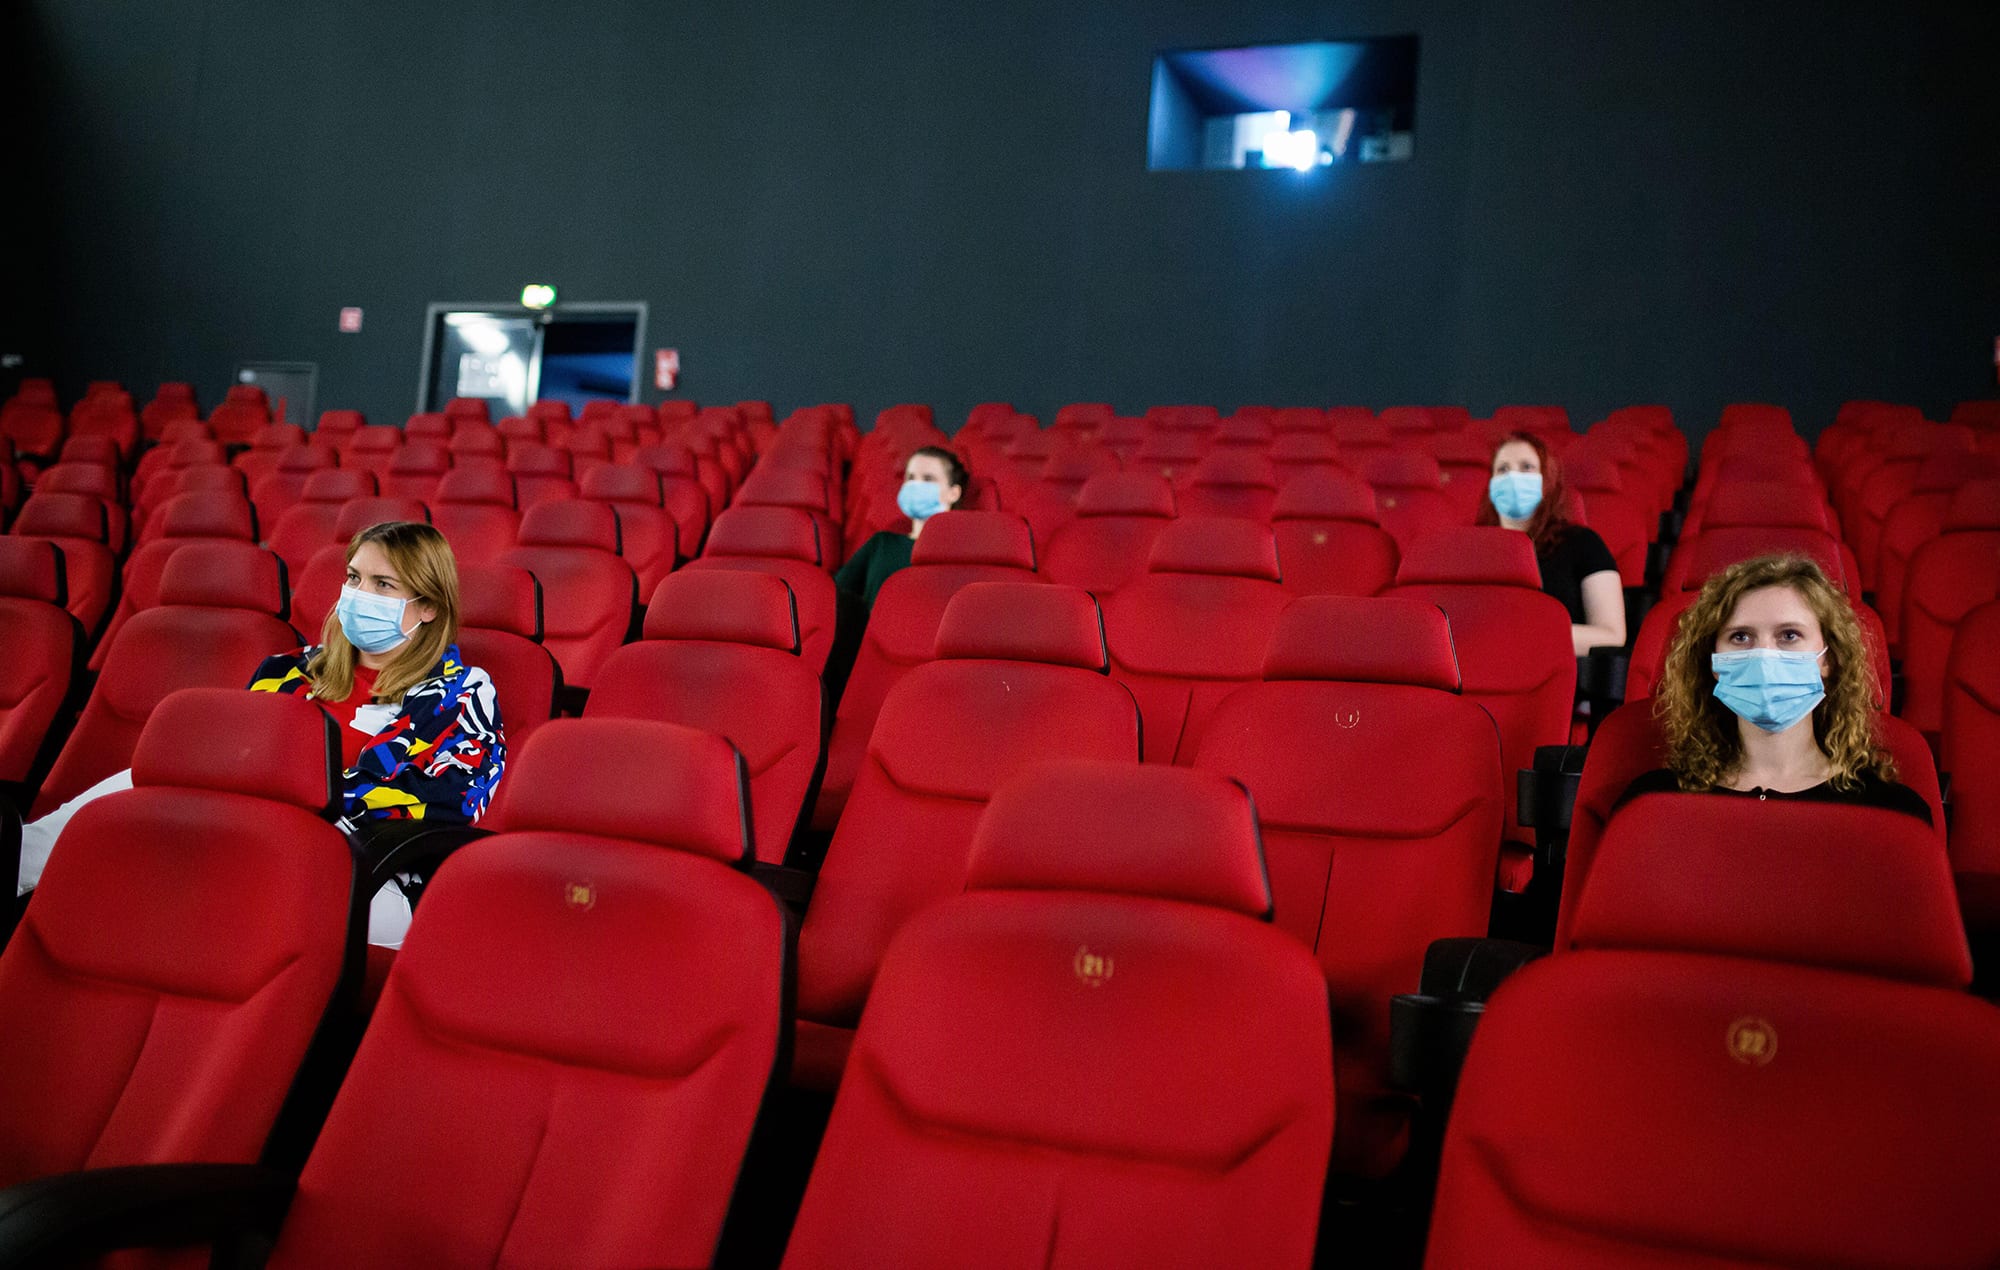 Customers have to keep their social distances in the cinema hall.